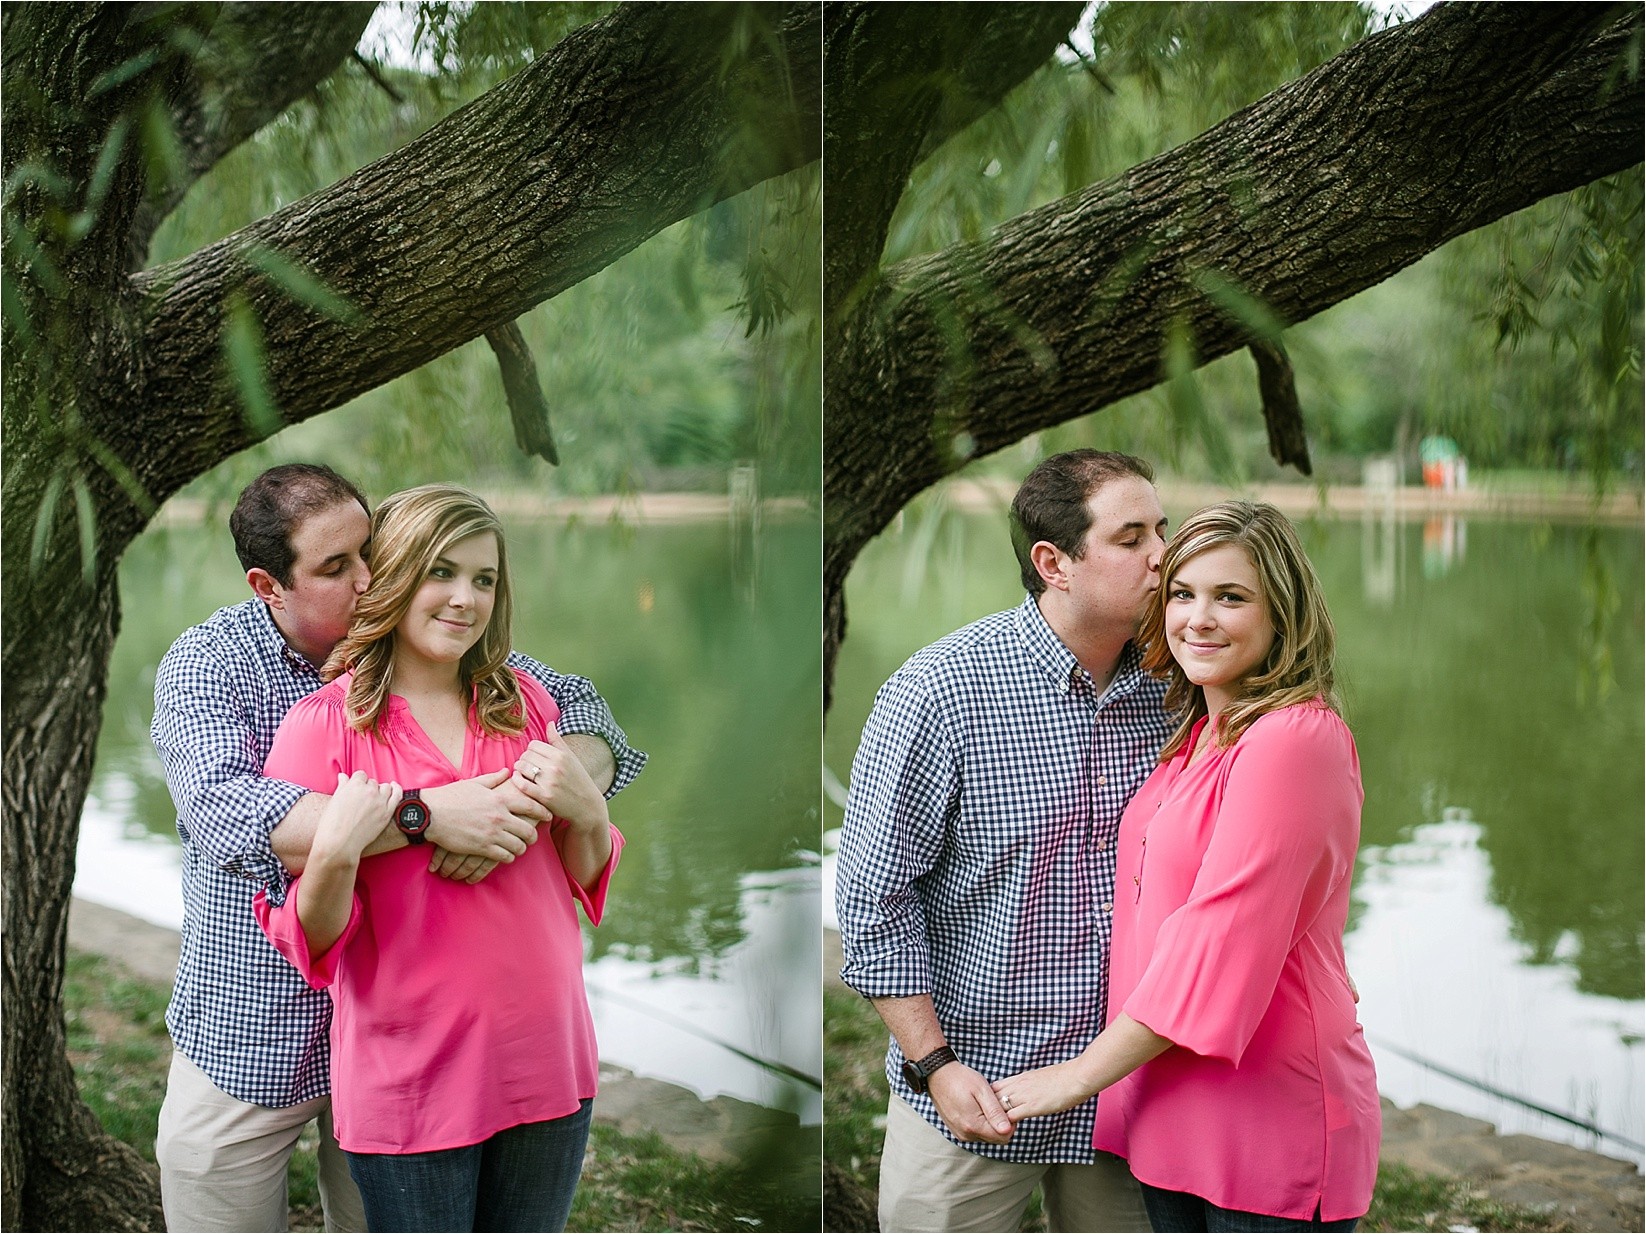 under the spanish moss tree at Catherine & Jordan's engagement session at freedom park and marshall park in Charlotte North Carolina